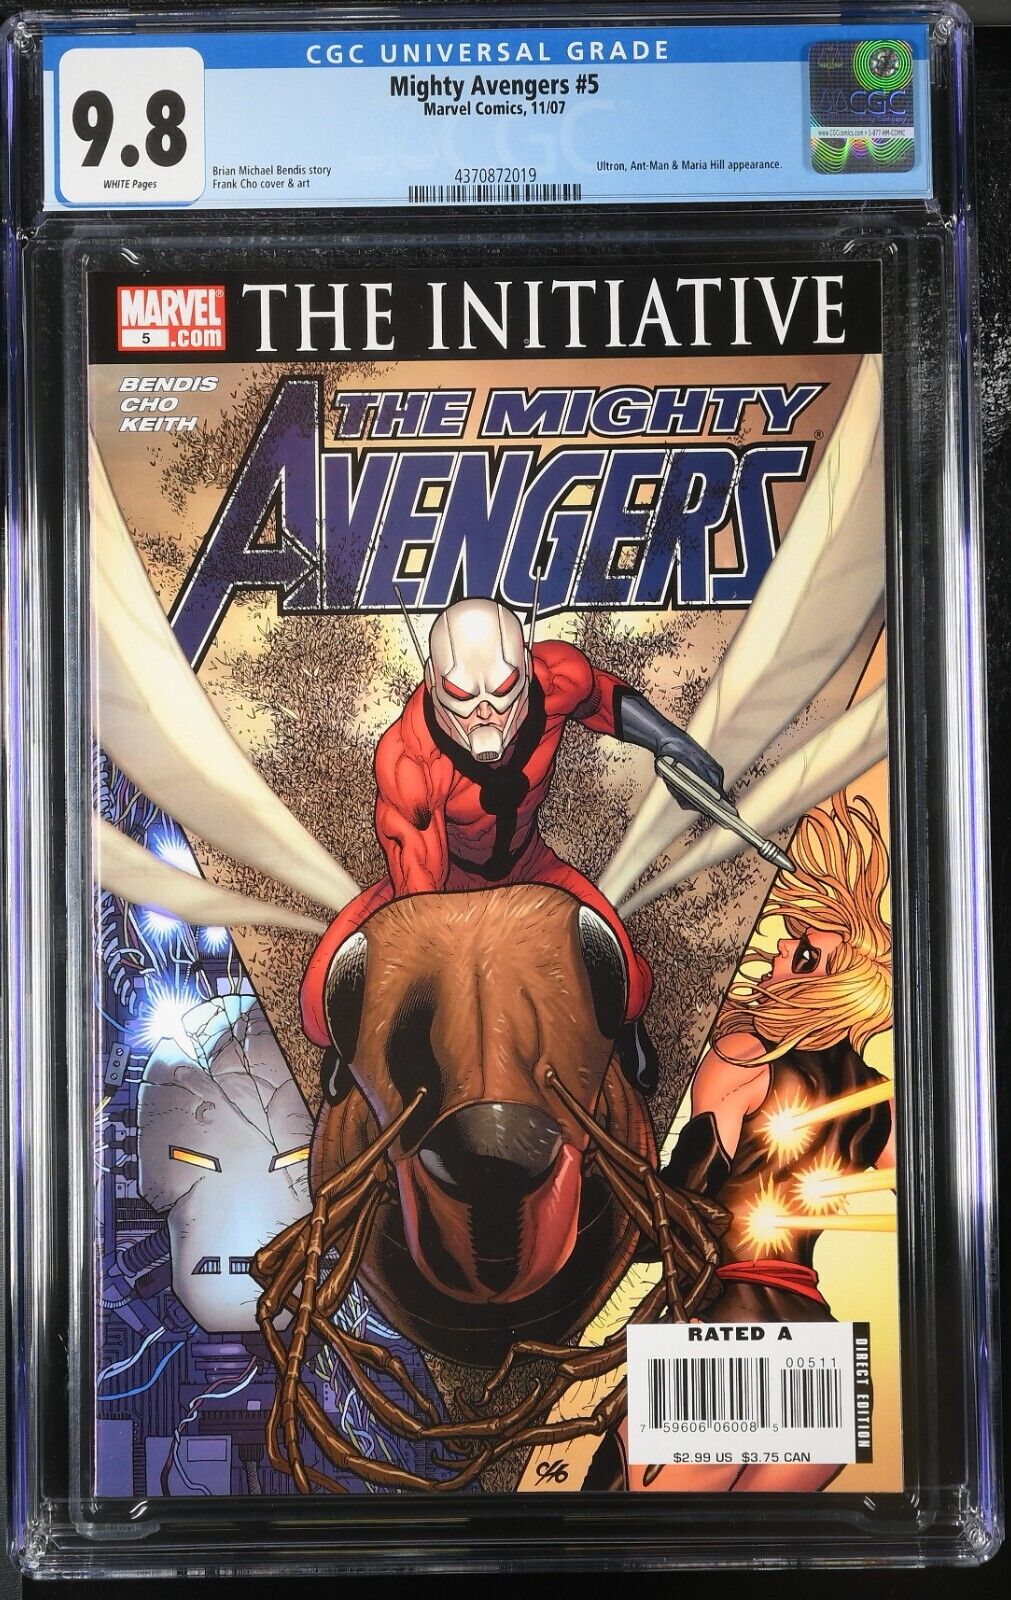 MIGHTY AVENGERS #5 (11/07) ~ CGC 9.8 ~ WHITE PAGES ~ MARVEL COMICS ~ ULTRON APP